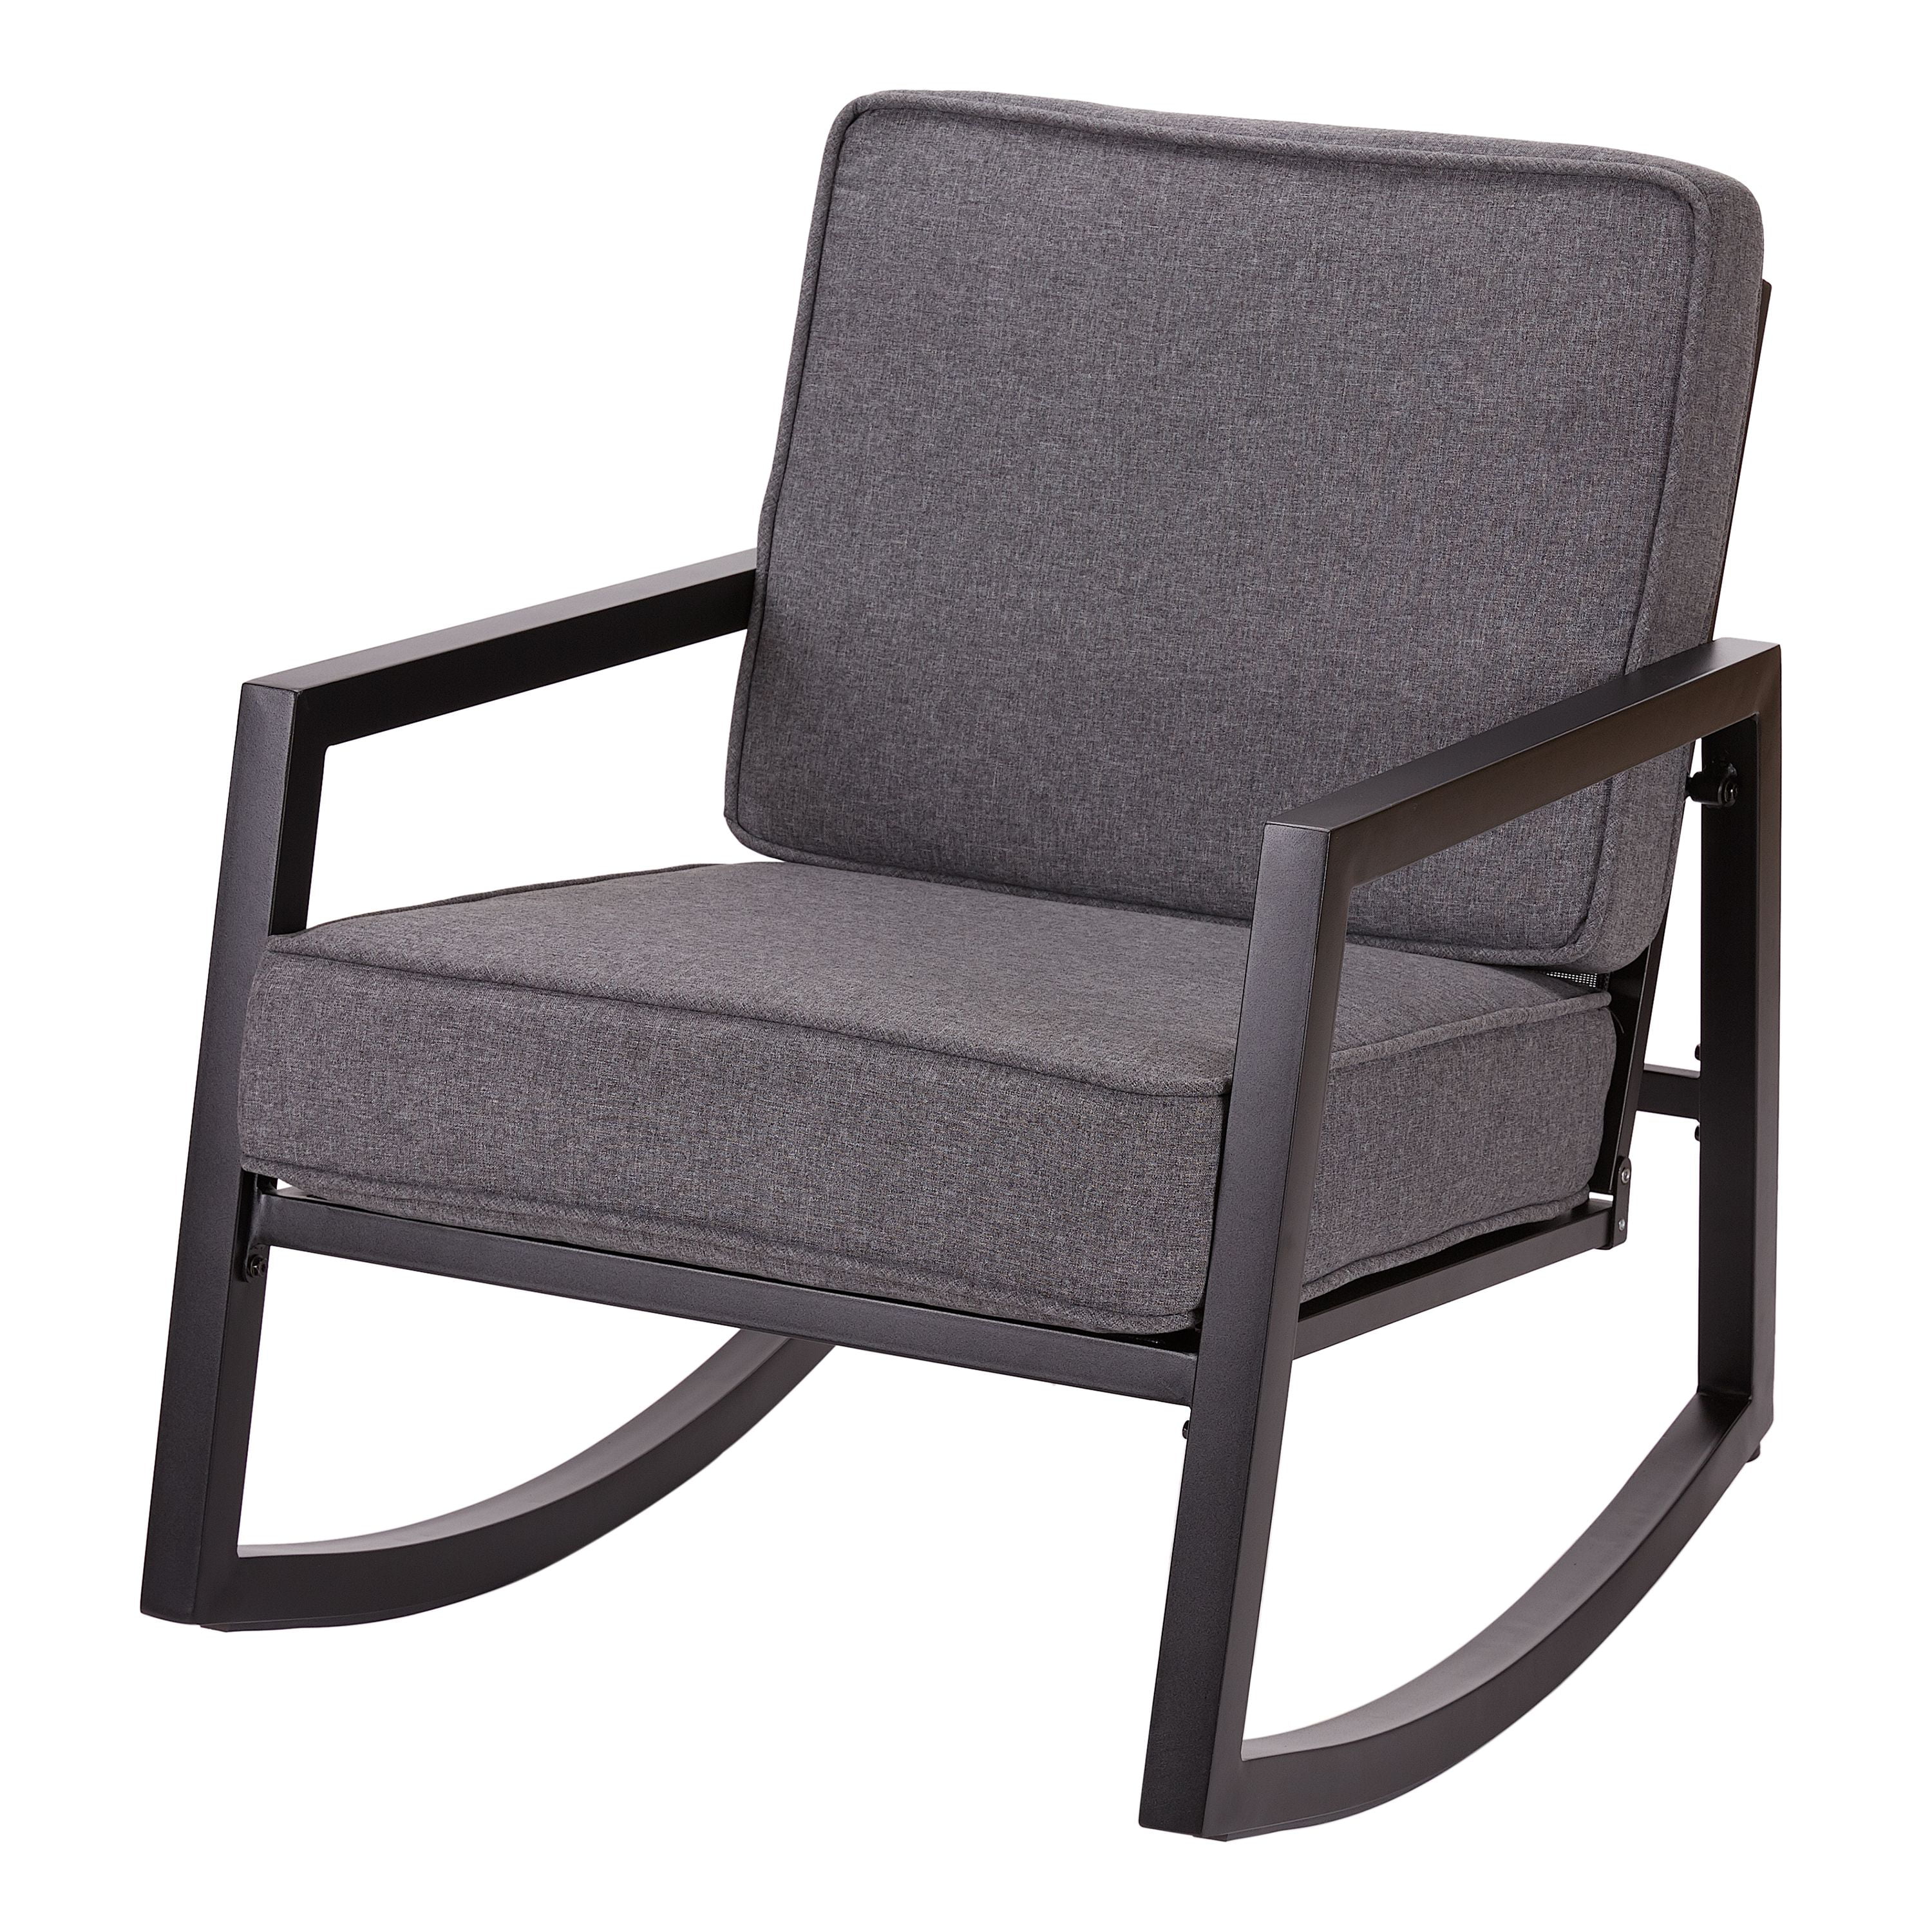 Mainstays Moss Falls Patio Rocking Chair with Gray